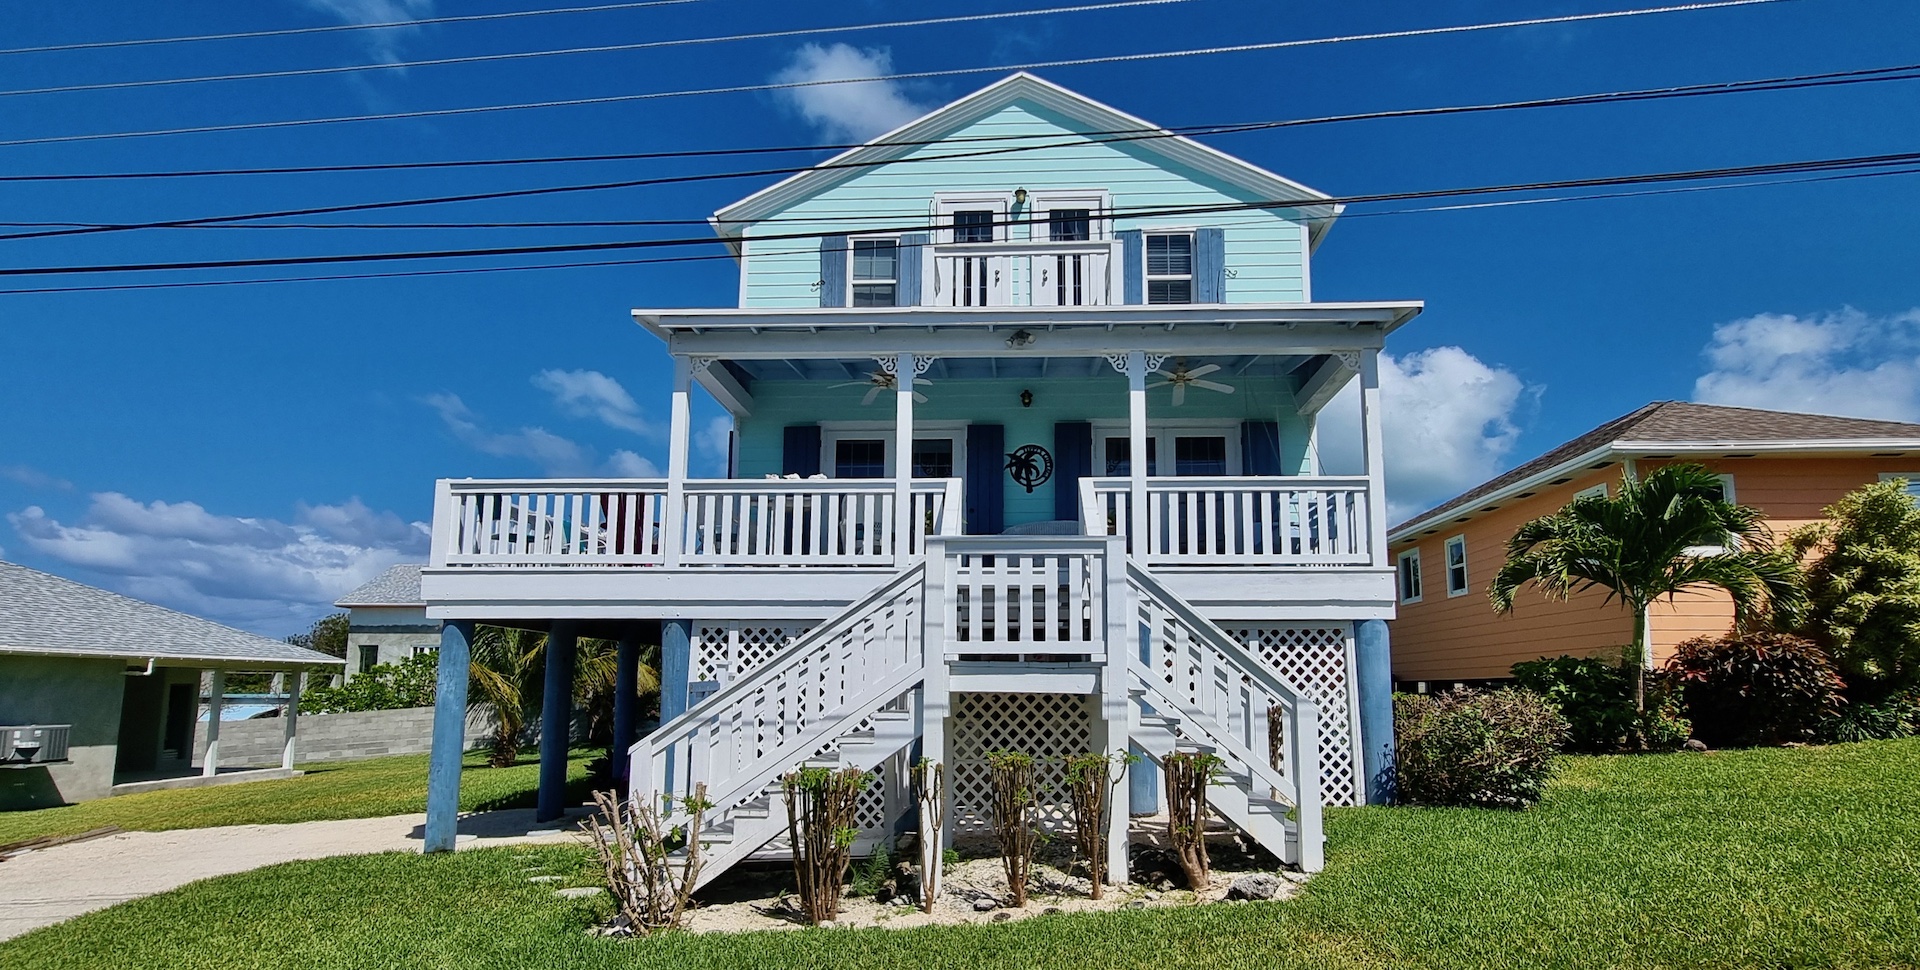 oceanview-investment-cottage-near-beach-russell-island-bahamas-real-estate-1